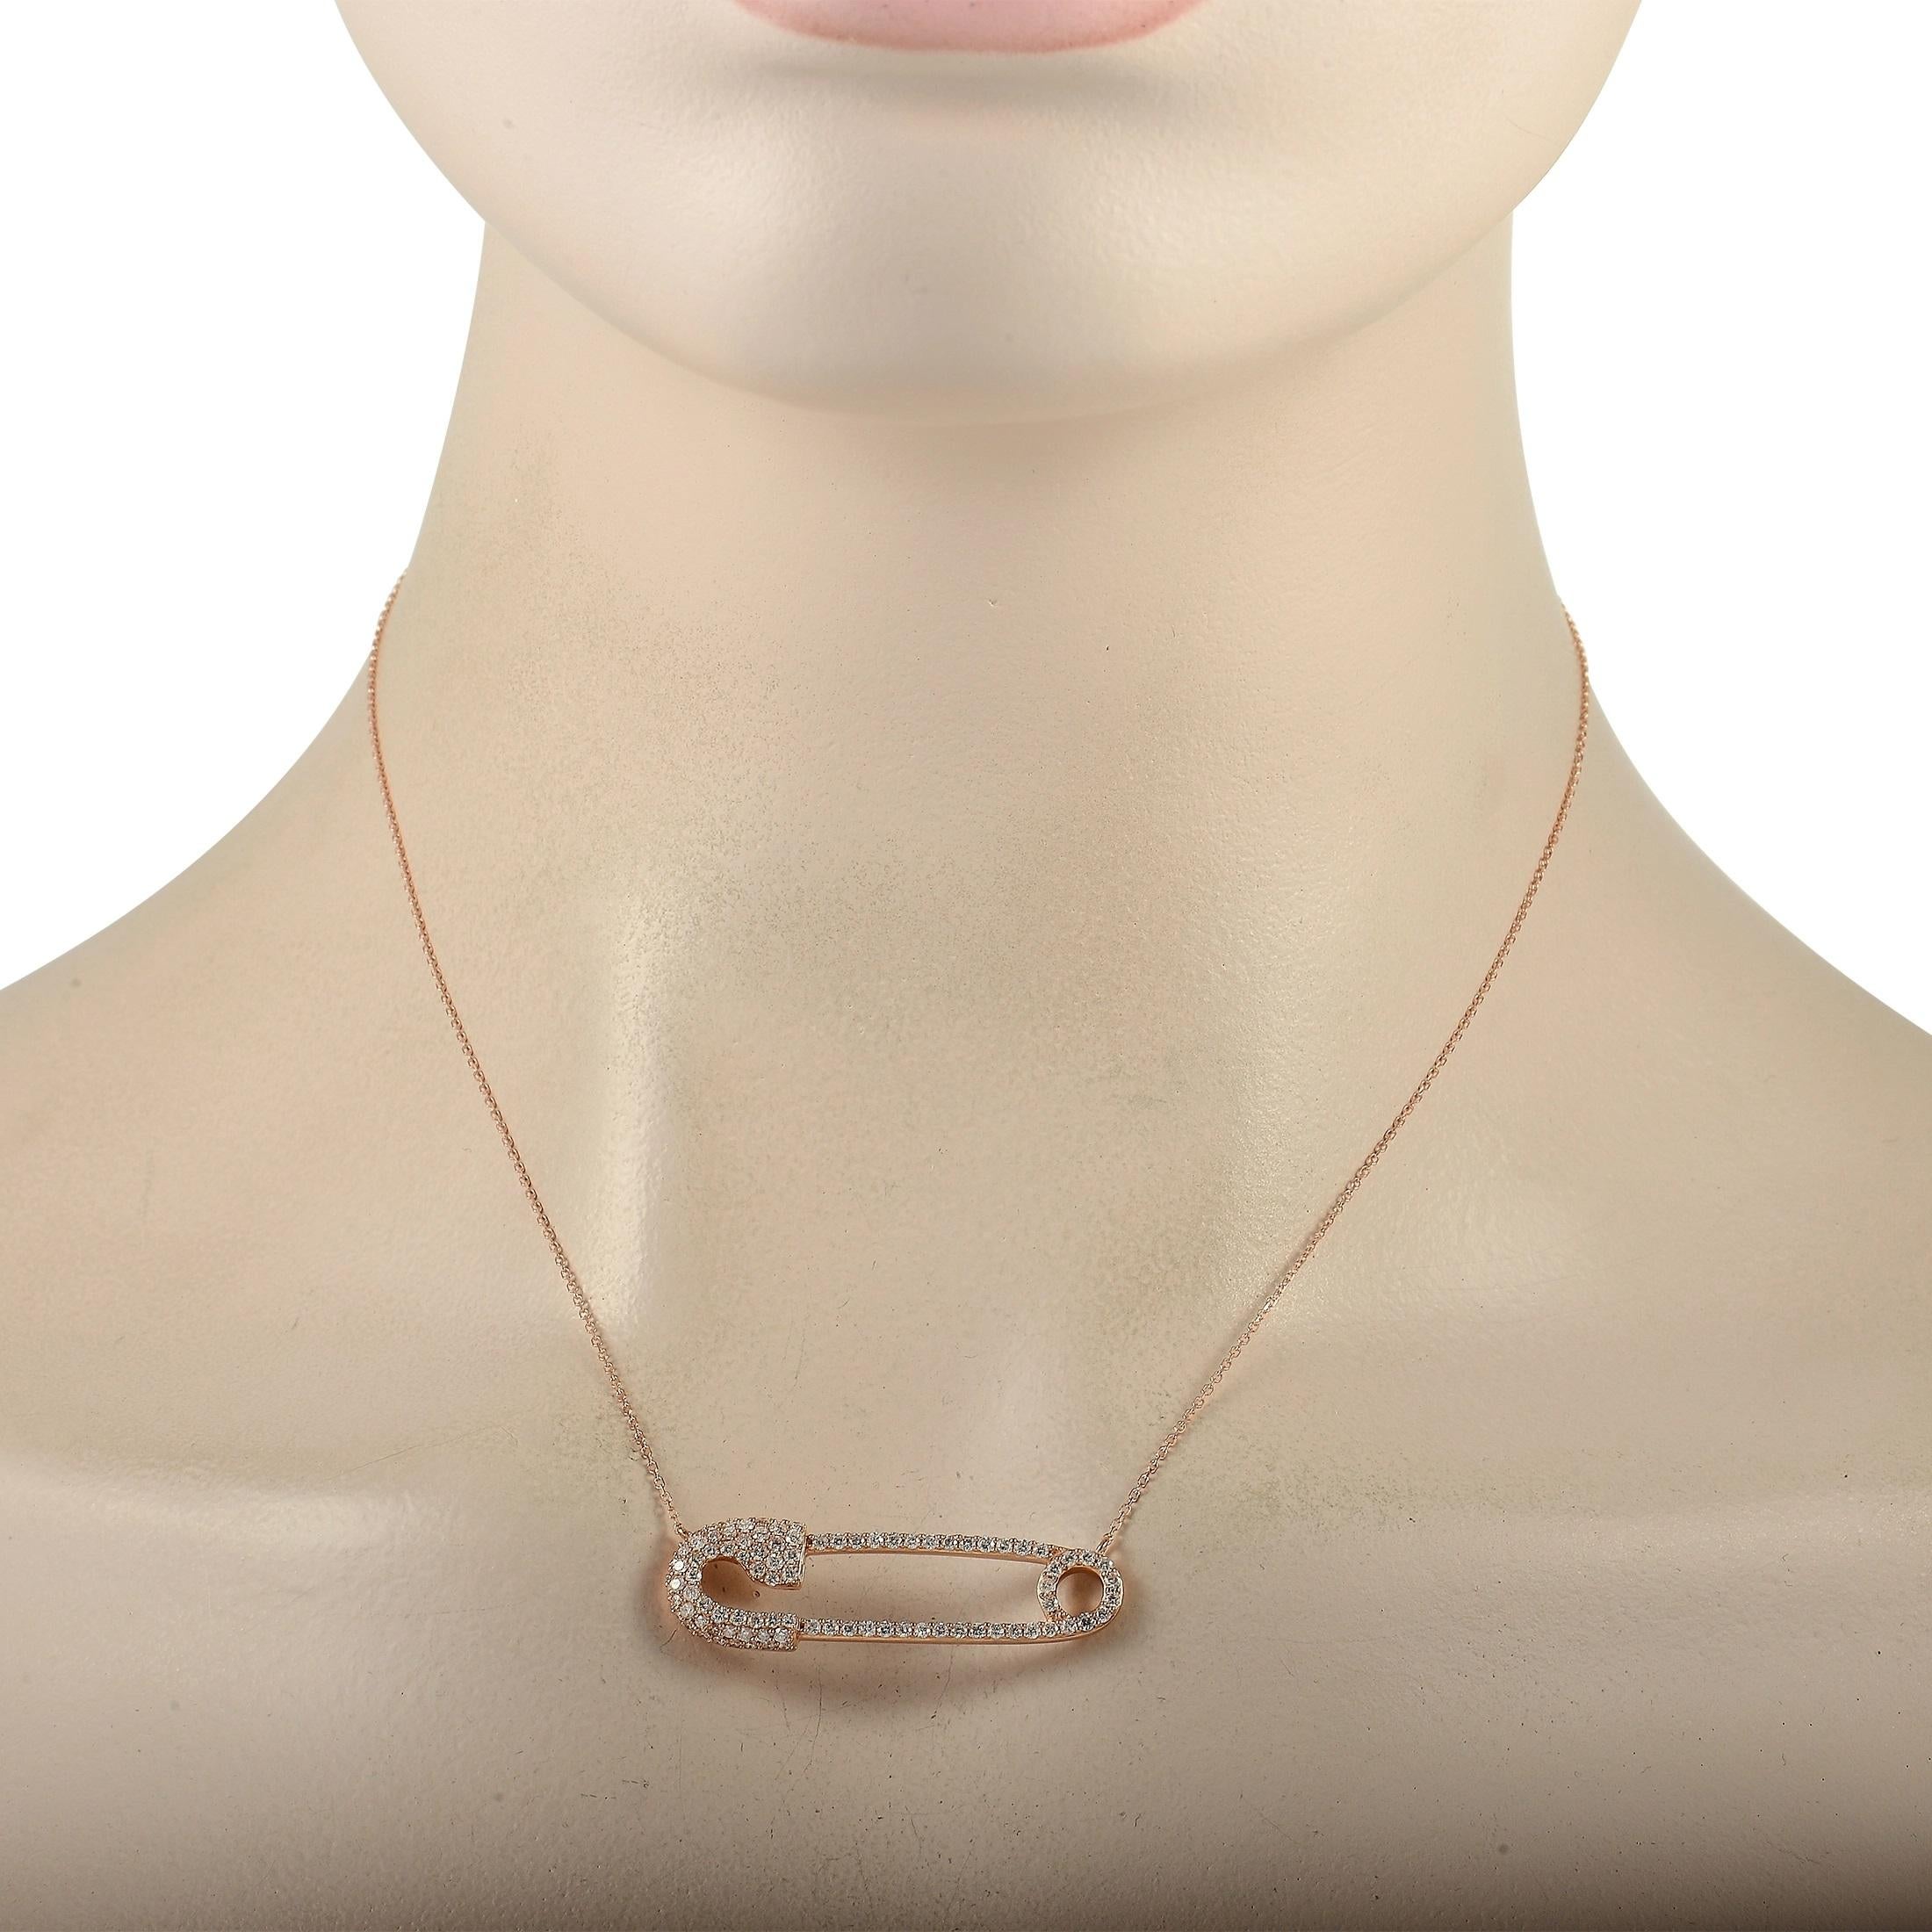 A safety pin shaped pendant measuring 1.5” long and 0.5” wide makes a statement on this charming 18K Rose Gold necklace. It sits at the center of a delicate 15” chain and comes to life thanks to glittering diamonds with a total weight of 1.0 carats.